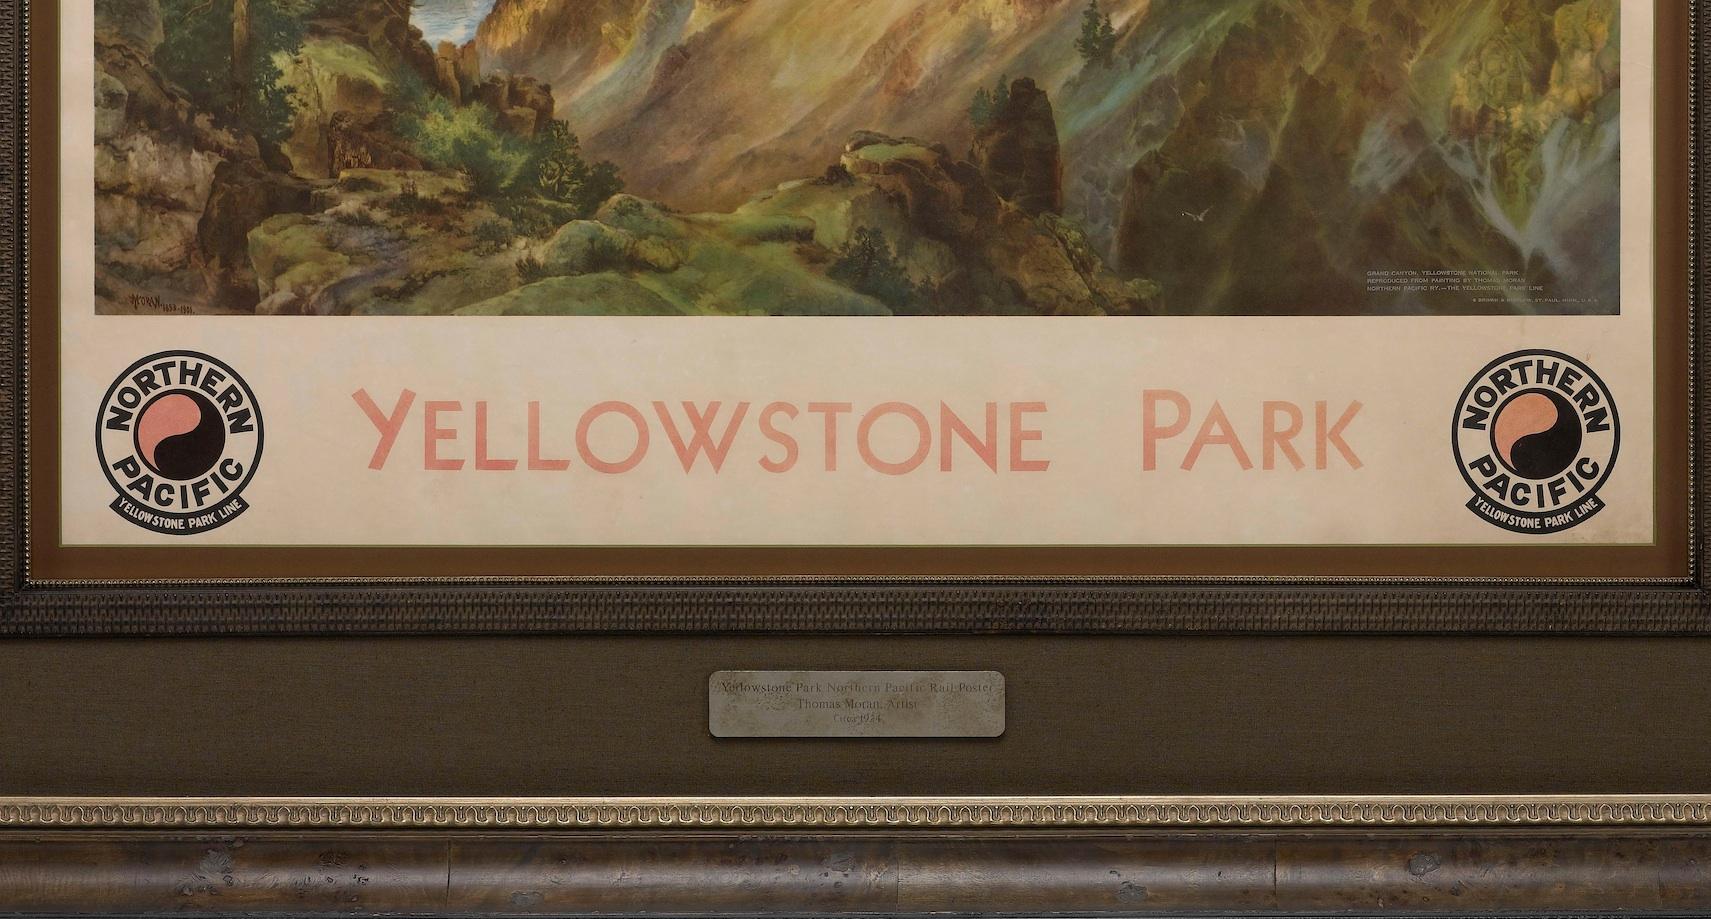 Presented is a Northern Pacific Railroad poster, advertising their Yellowstone Park Line. The central scene is a colorful reproduction print after Thomas Moran’s The Grand Canyon of the Yellowstone, 1893-1901. The bottom right corner of the work